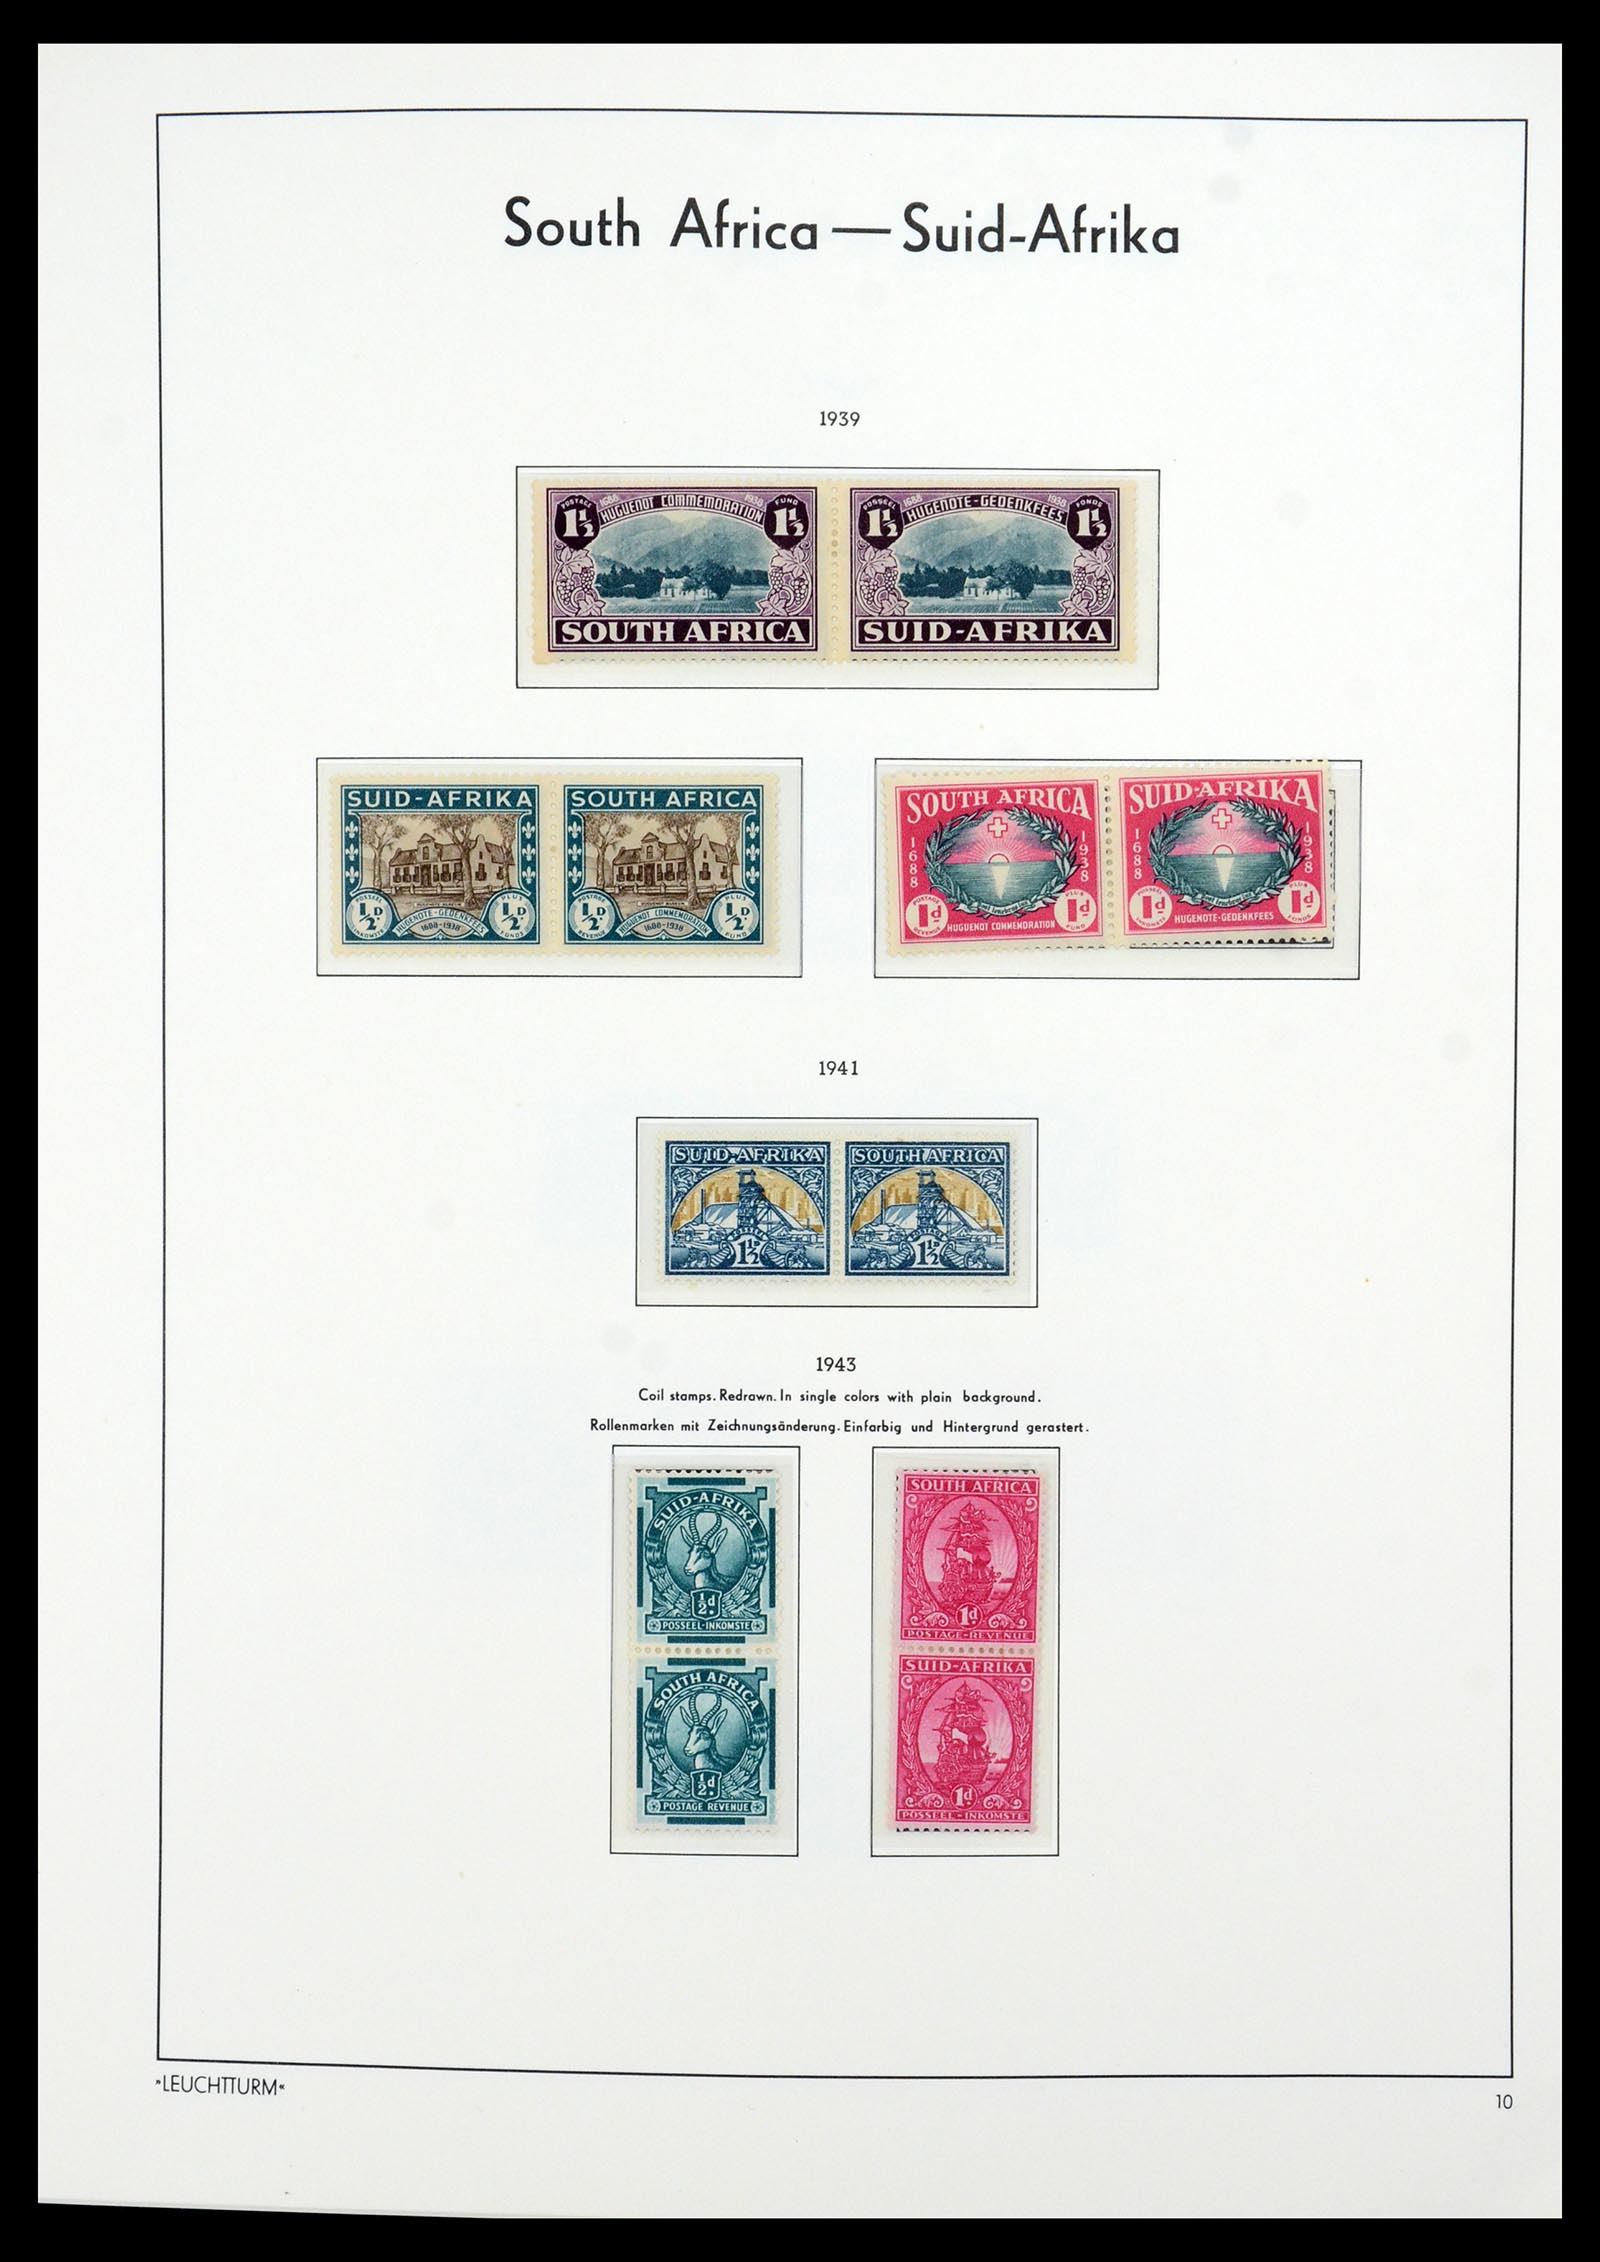 35789 044 - Stamp Collection 35789 South Africa and territories 1855-1999.